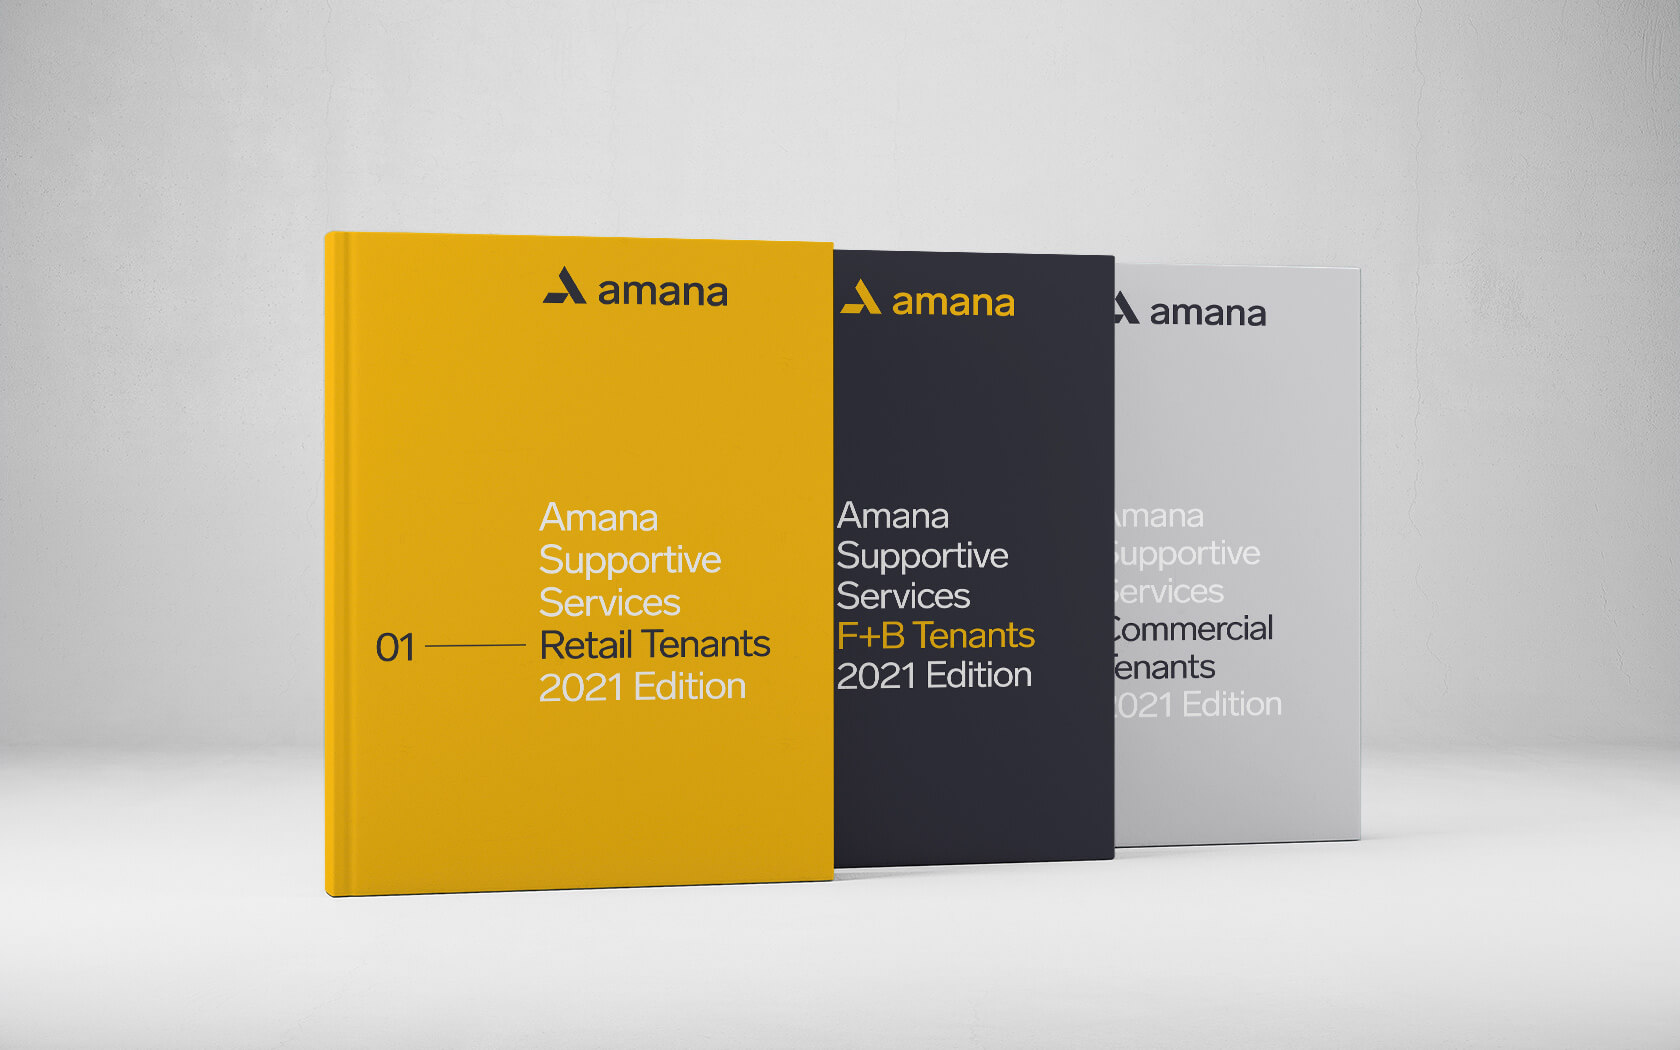 Amana report covers